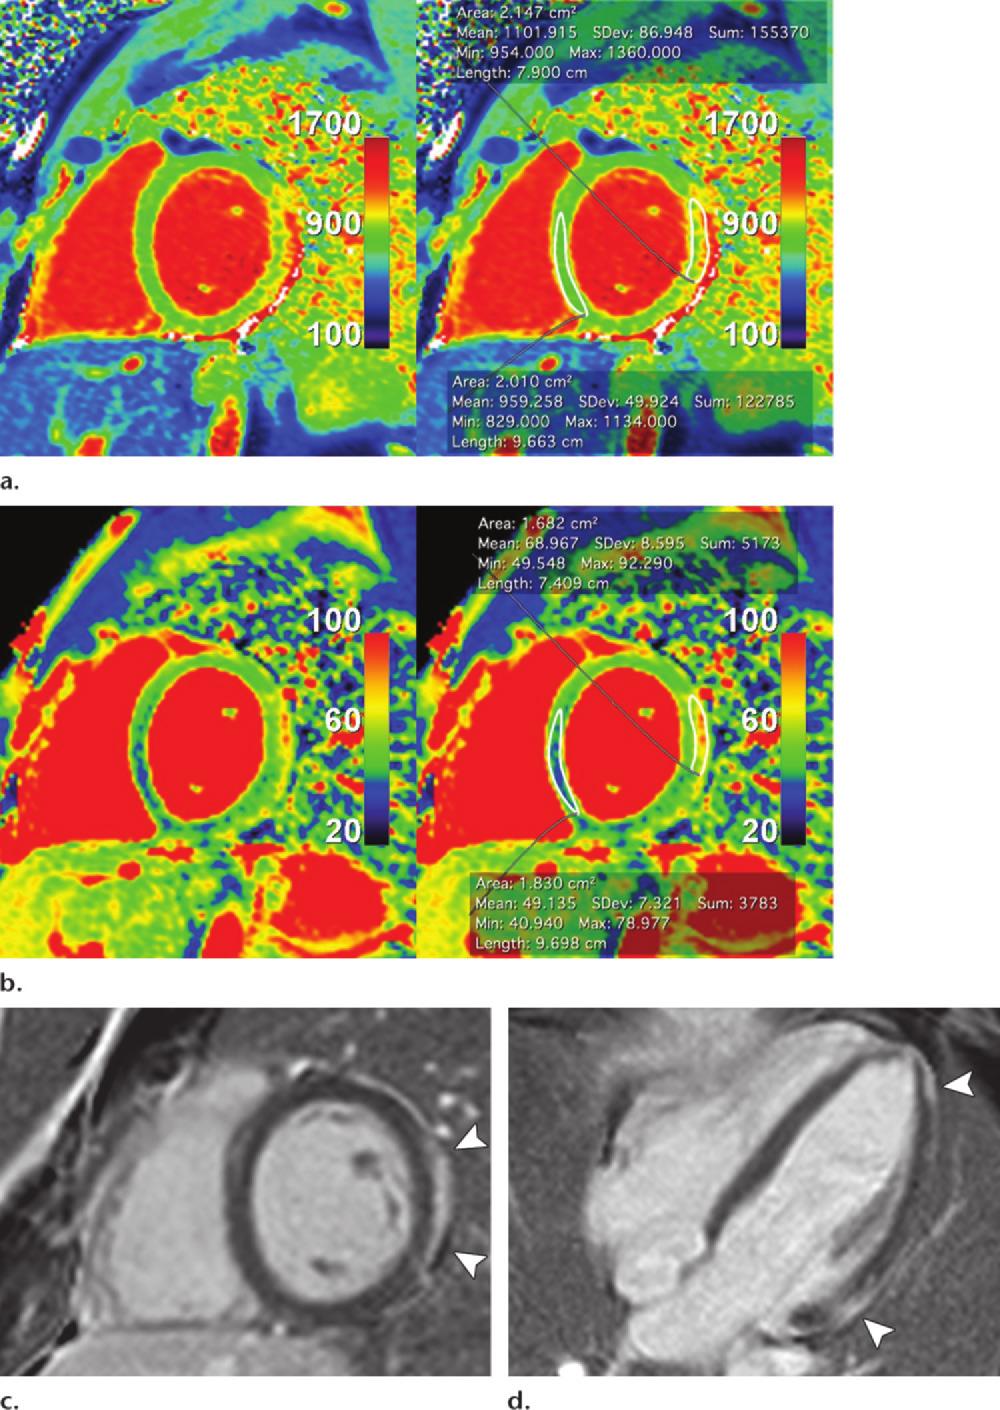 RG Volume 34 Number 6 Hamlin et al 1605 Figure 9. T1 and T2 mapping in an 18-year-old man with myopericarditis. (a, b) Short-axis nonenhanced MOLLI T1 (a) and SSFP T2 (b) maps obtained at 1.